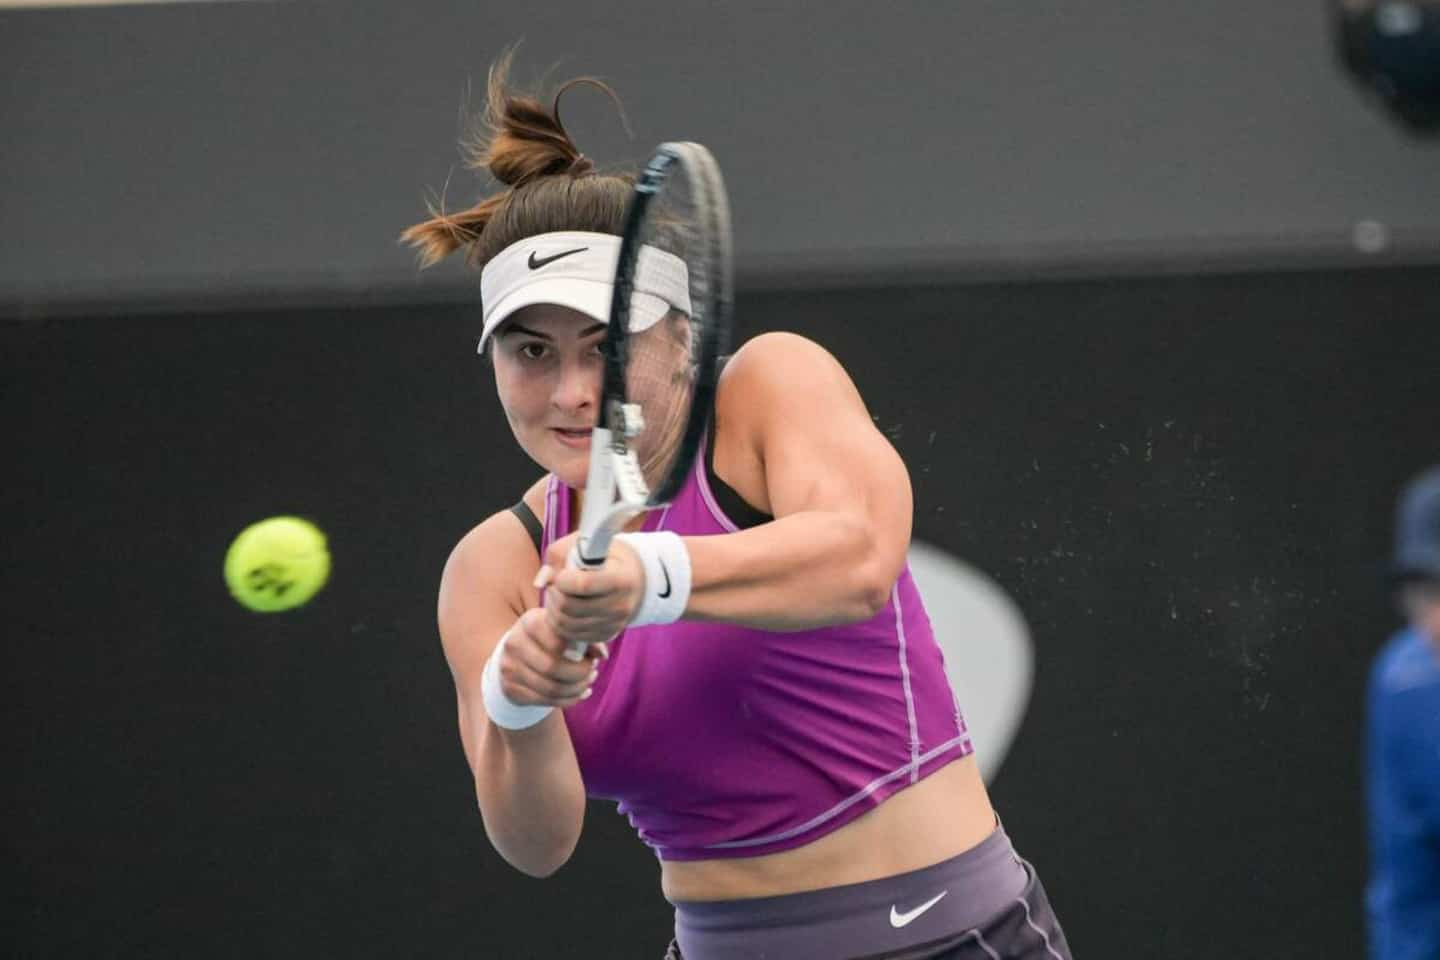 Bianca Andreescu narrowly defeated in Adelaide